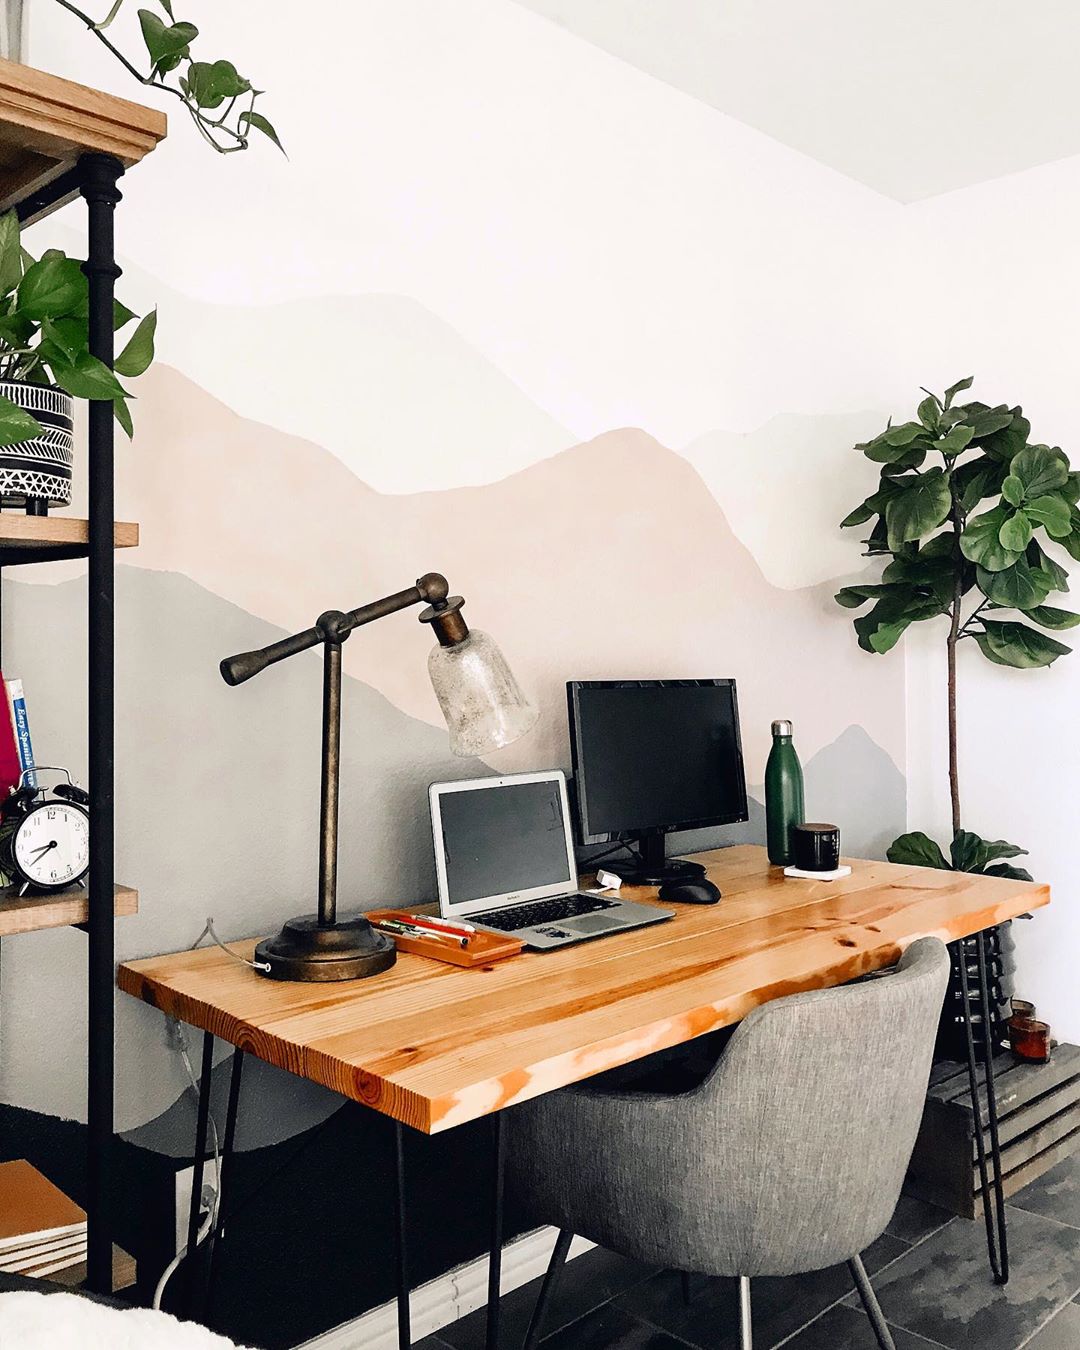 My Work From Home Essentials for a Productive Space